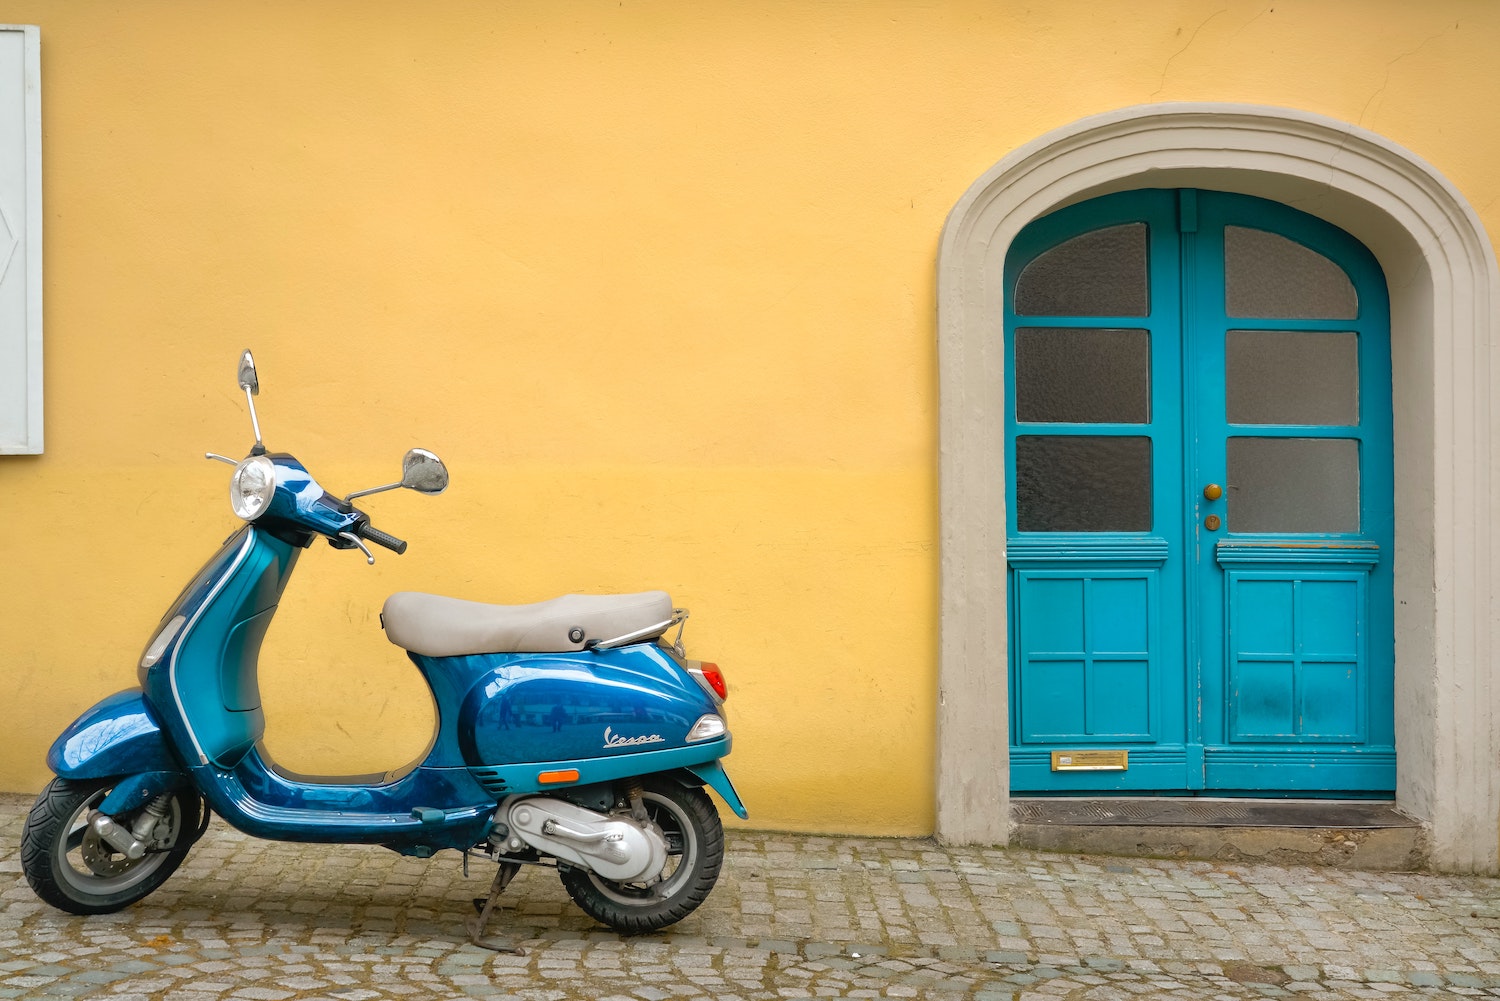 Blue Vespa scooter parked on a cobblestone street with a blue door visible in the background.